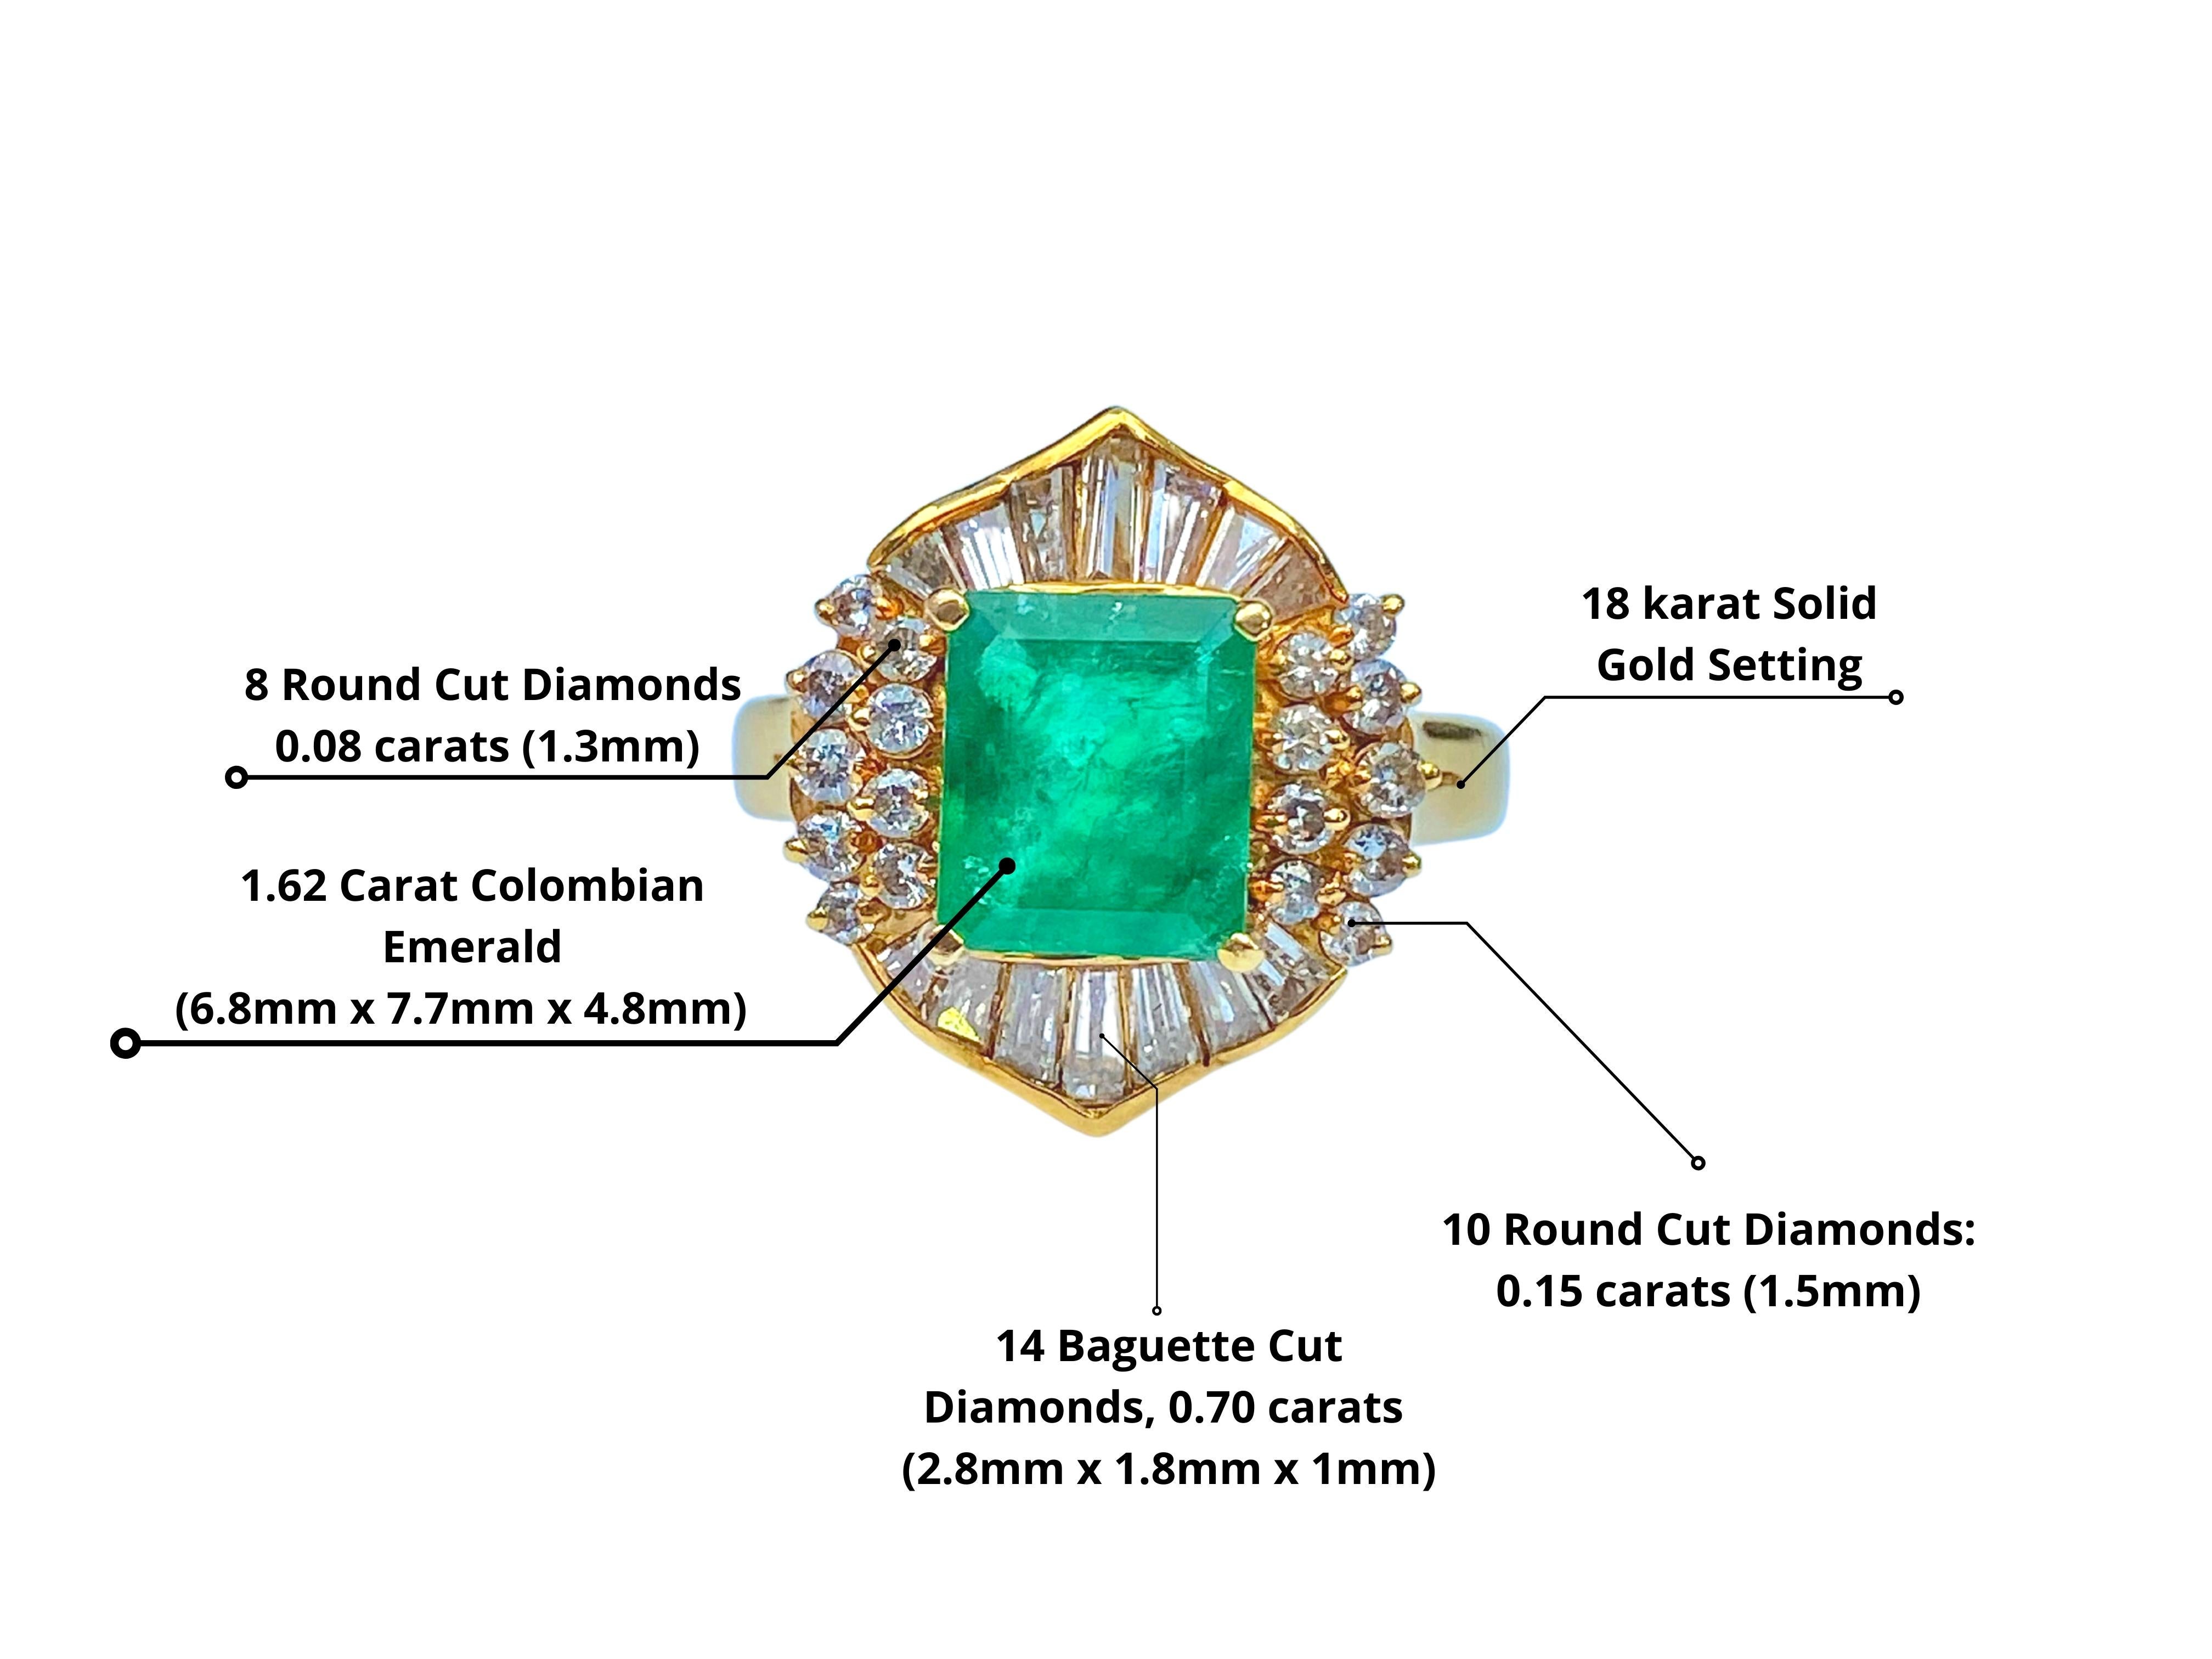 Centering a 1.62 Carat Emerald-Cut Colombian Emerald, framed by an additional 0.93 carats of Baguette-Cut and Round-Brilliant Cut Diamonds, and set in 18K Yellow Gold– also a part of a lovely Emerald Set!

Details:
✔ Stone: Emerald
✔ Center-Stone